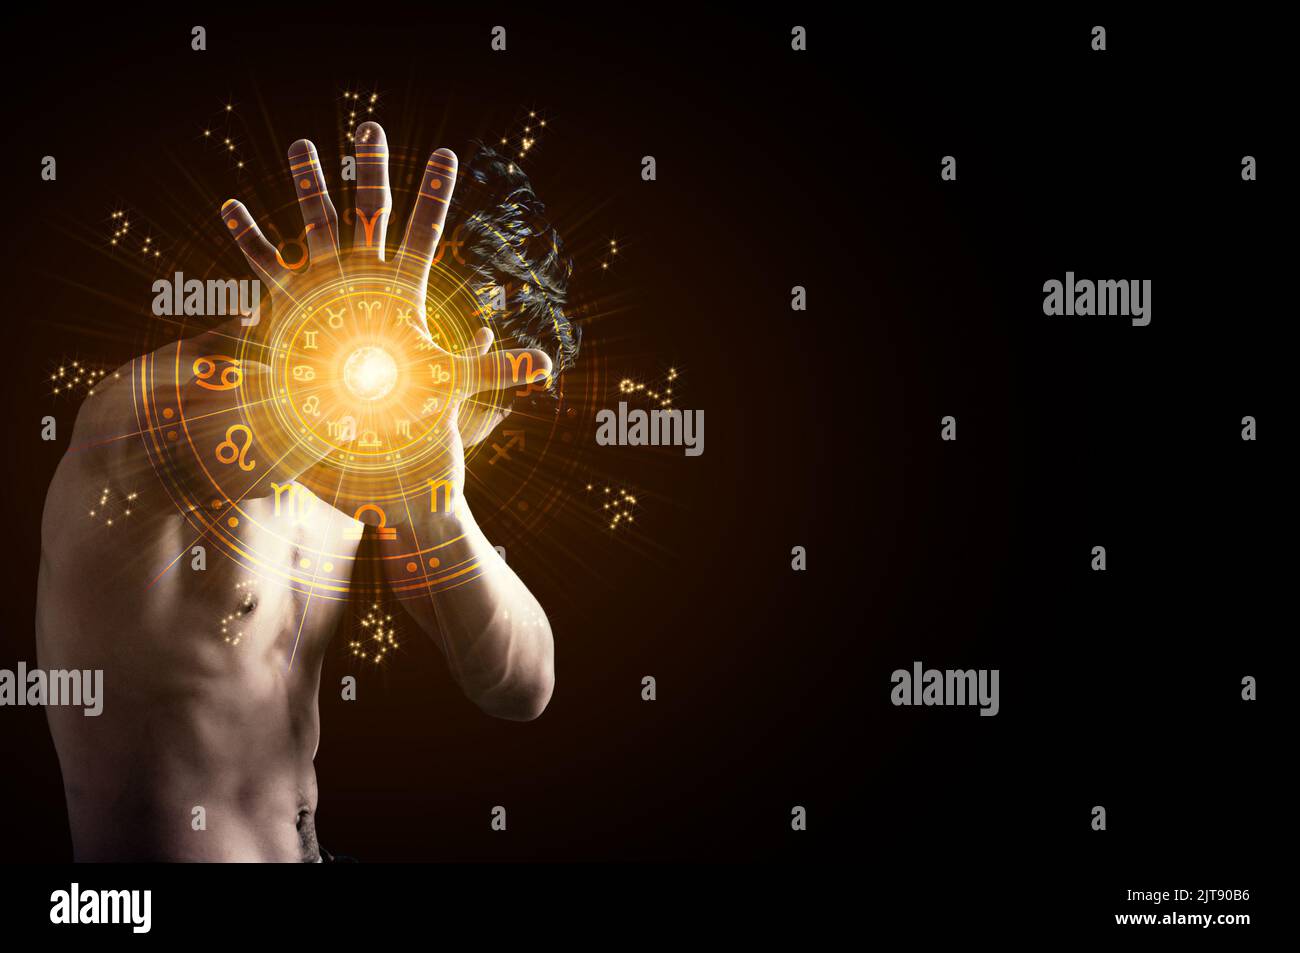 A man showing stop hands with the hands have astrological symbols. Stock Photo